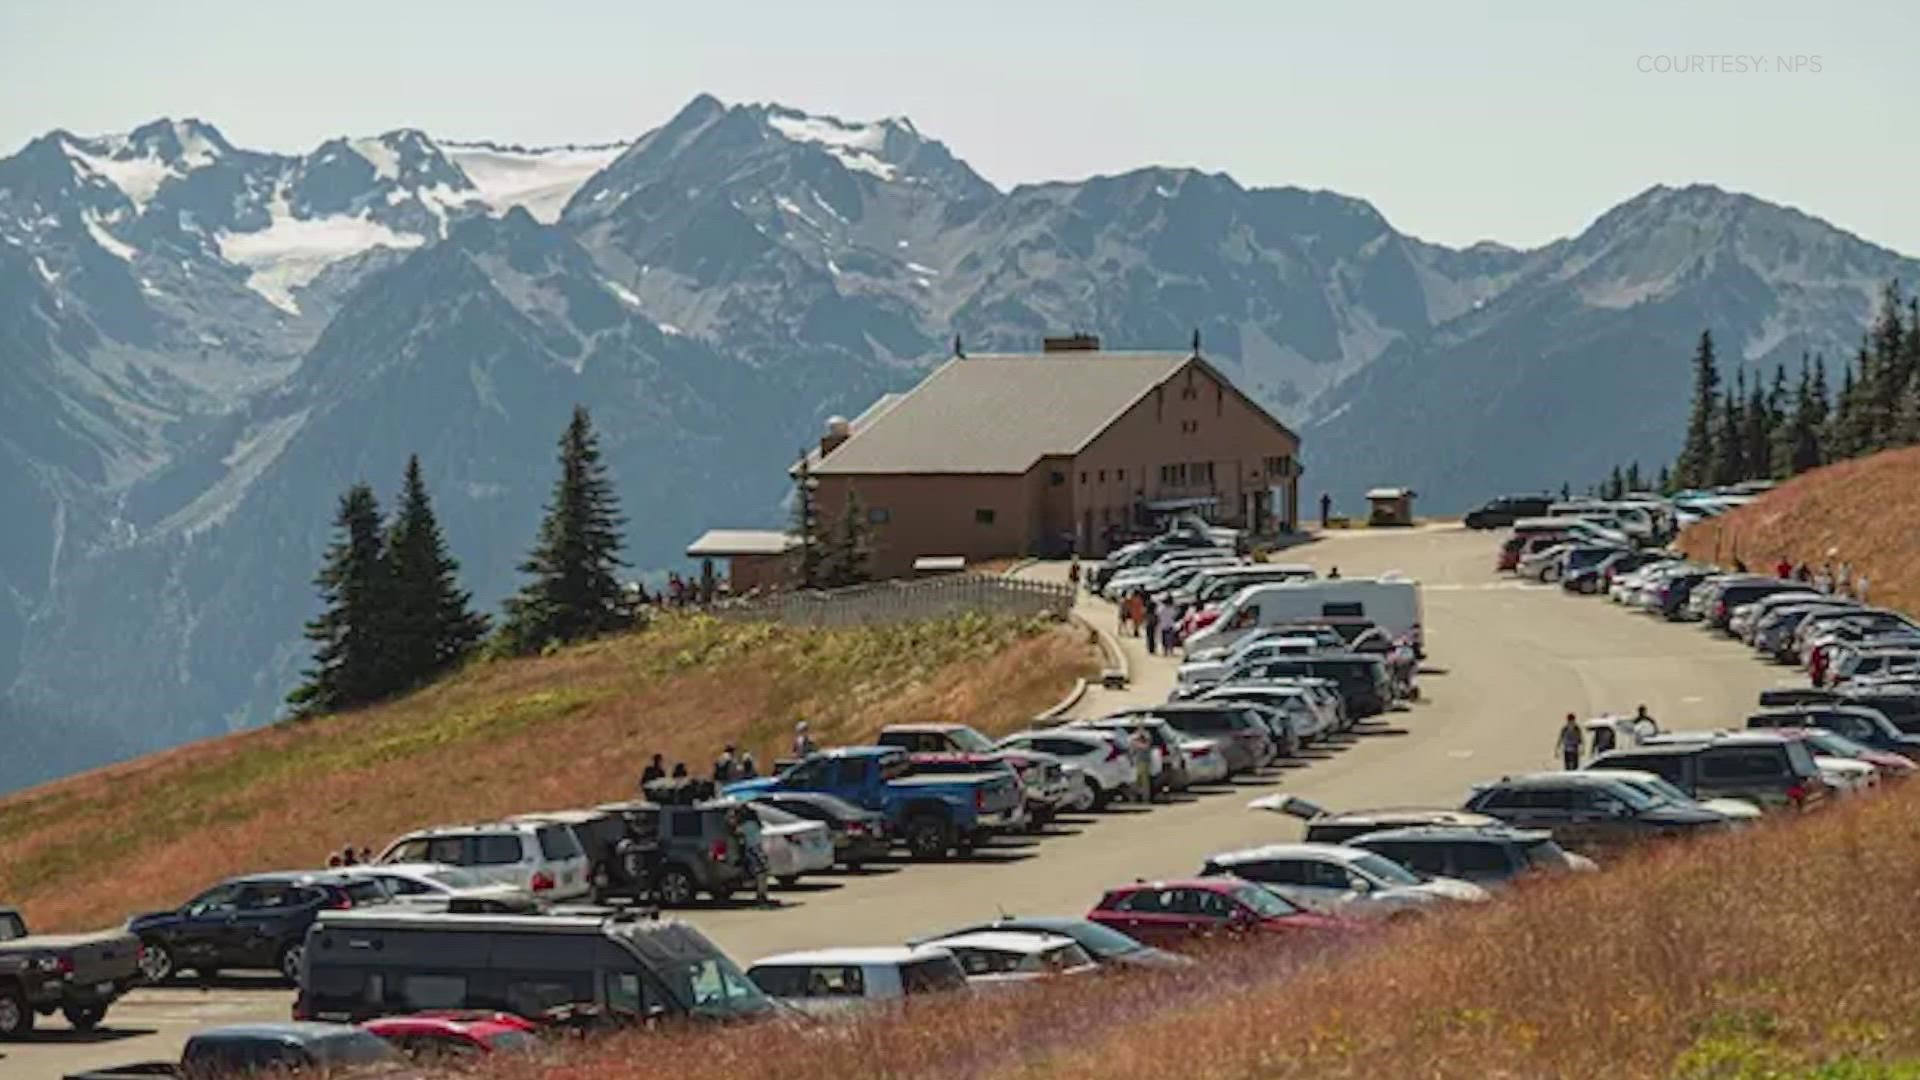 The Great American Outdoors Act will fund safety and accessibility repairs at the lodge.